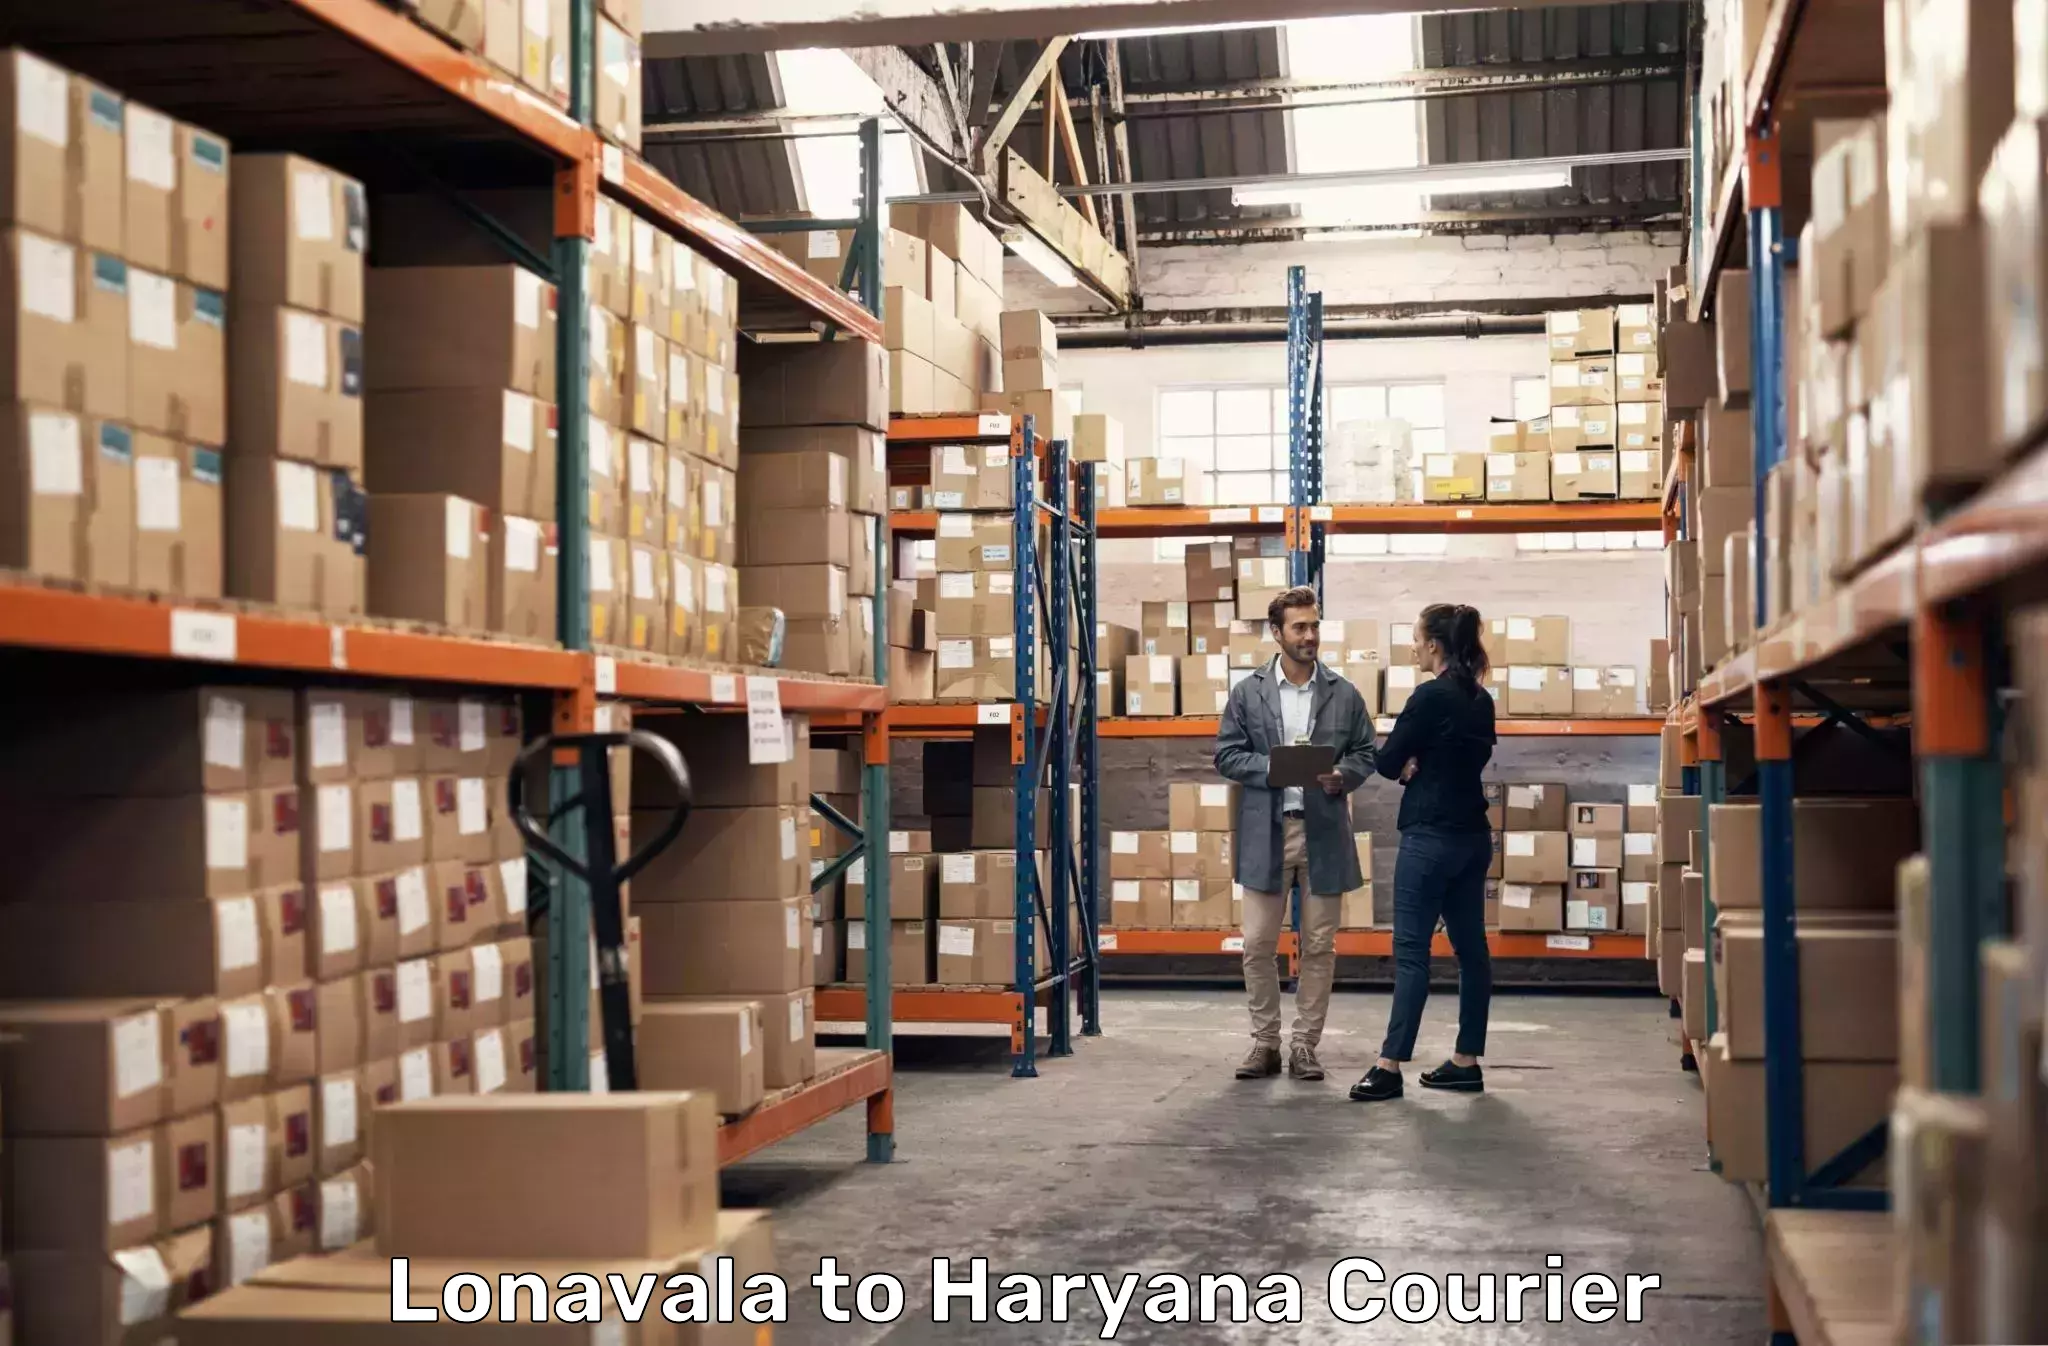 Global courier networks Lonavala to Gurgaon